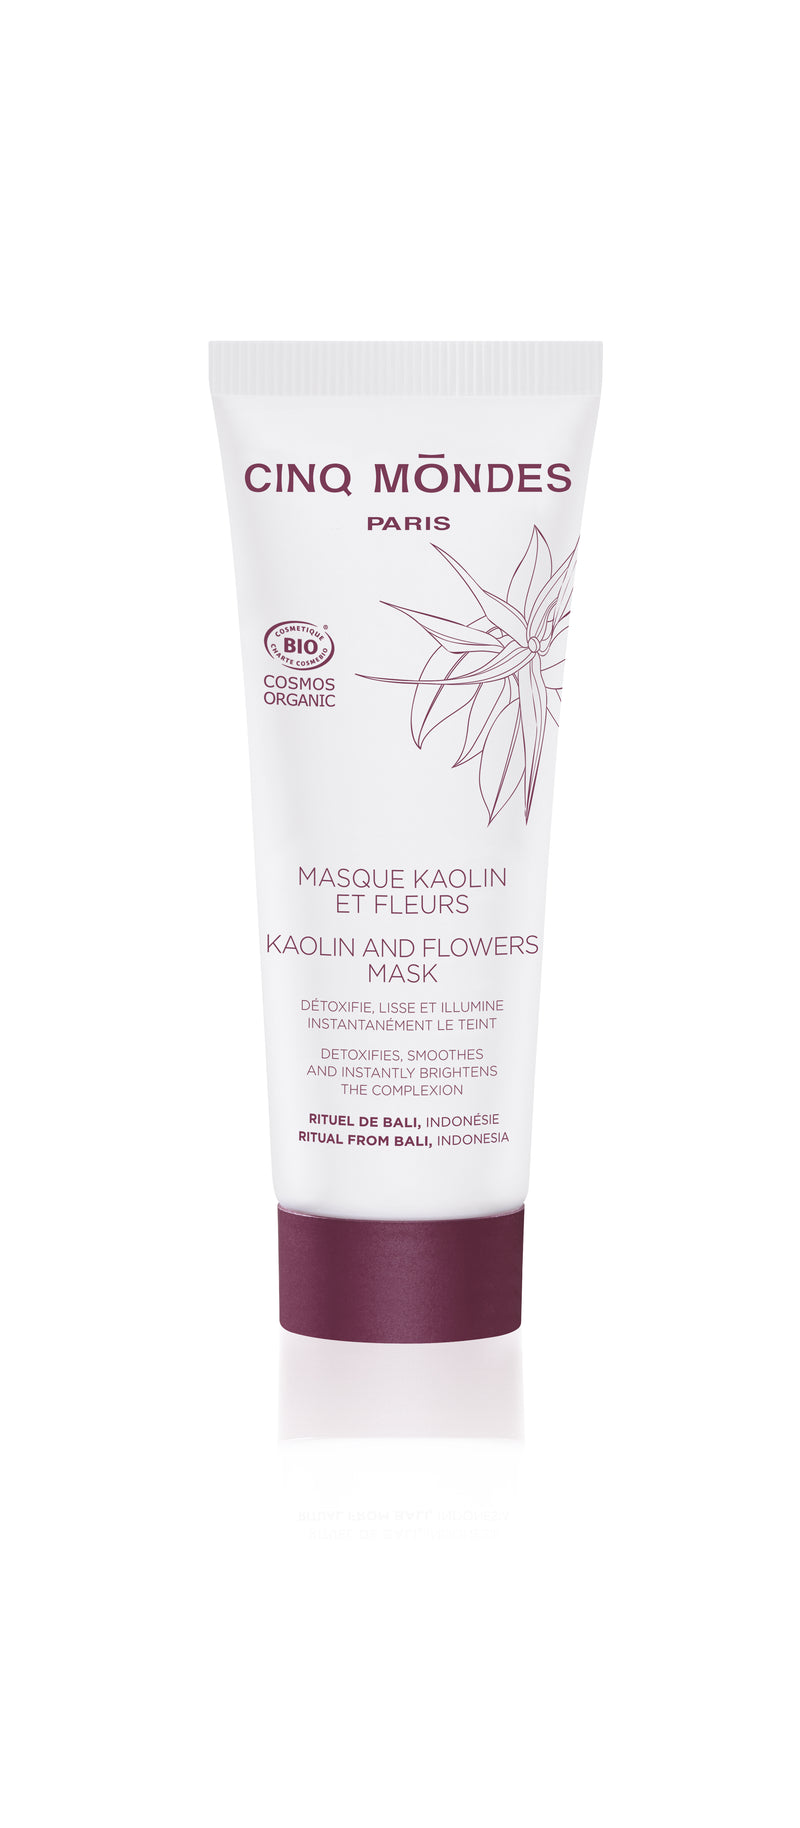 CINQ MONDES KAOLIN AND FLOWERS MASK